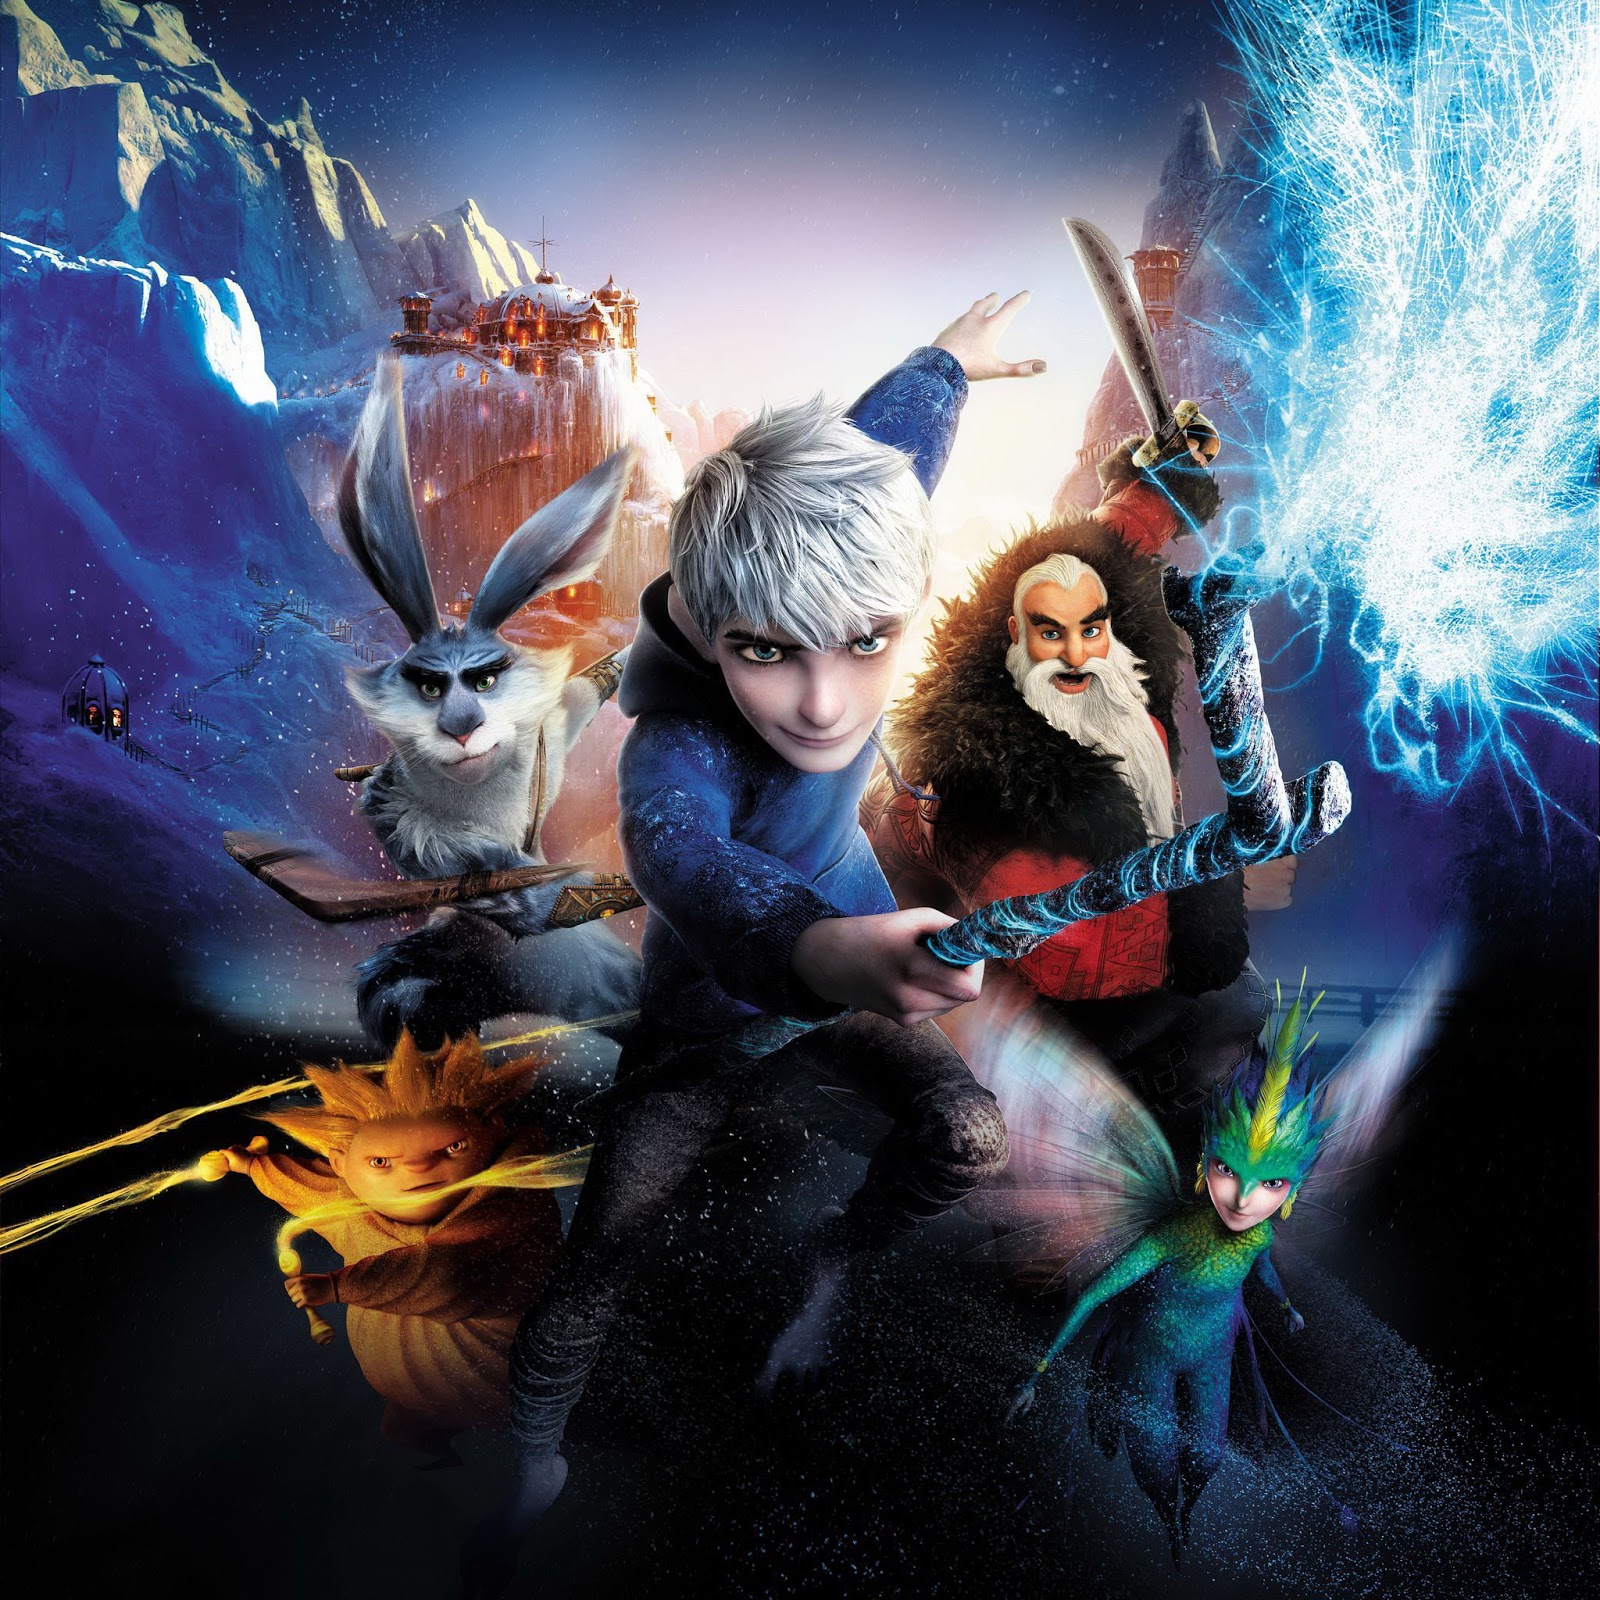 rise of the guardians download torrent